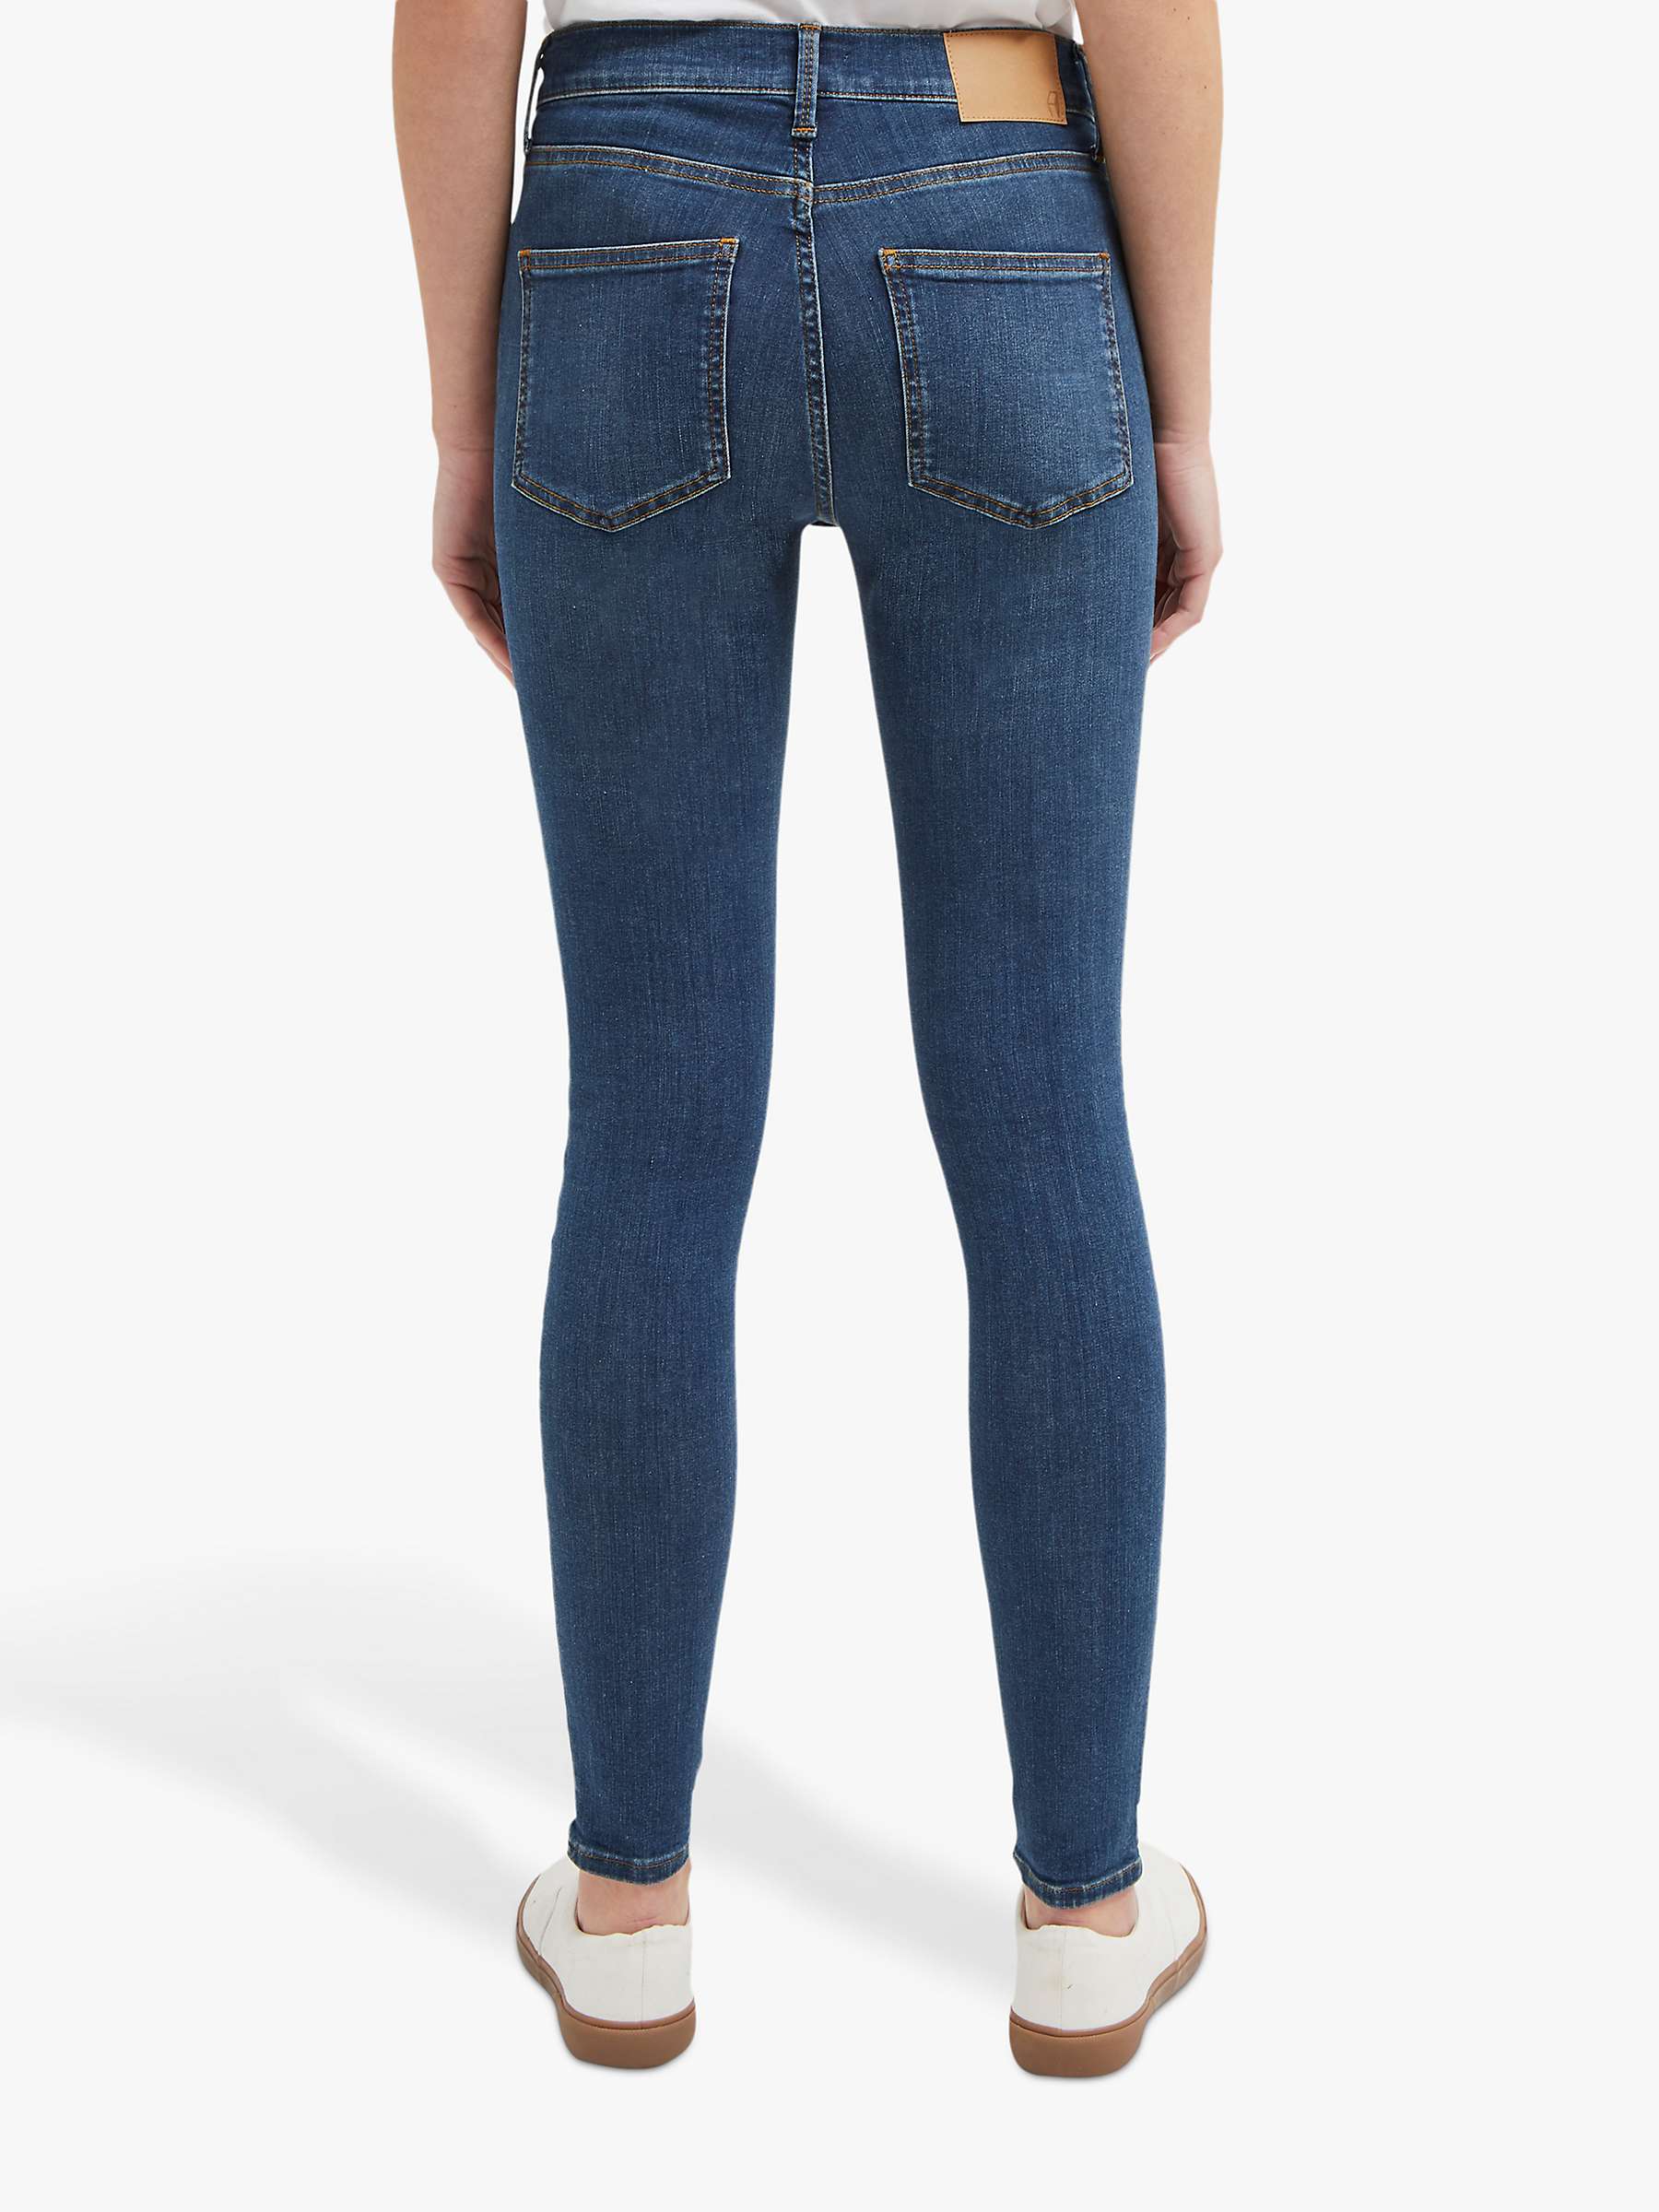 Buy French Connection Mid Rise Skinny Rebound Jeans Online at johnlewis.com